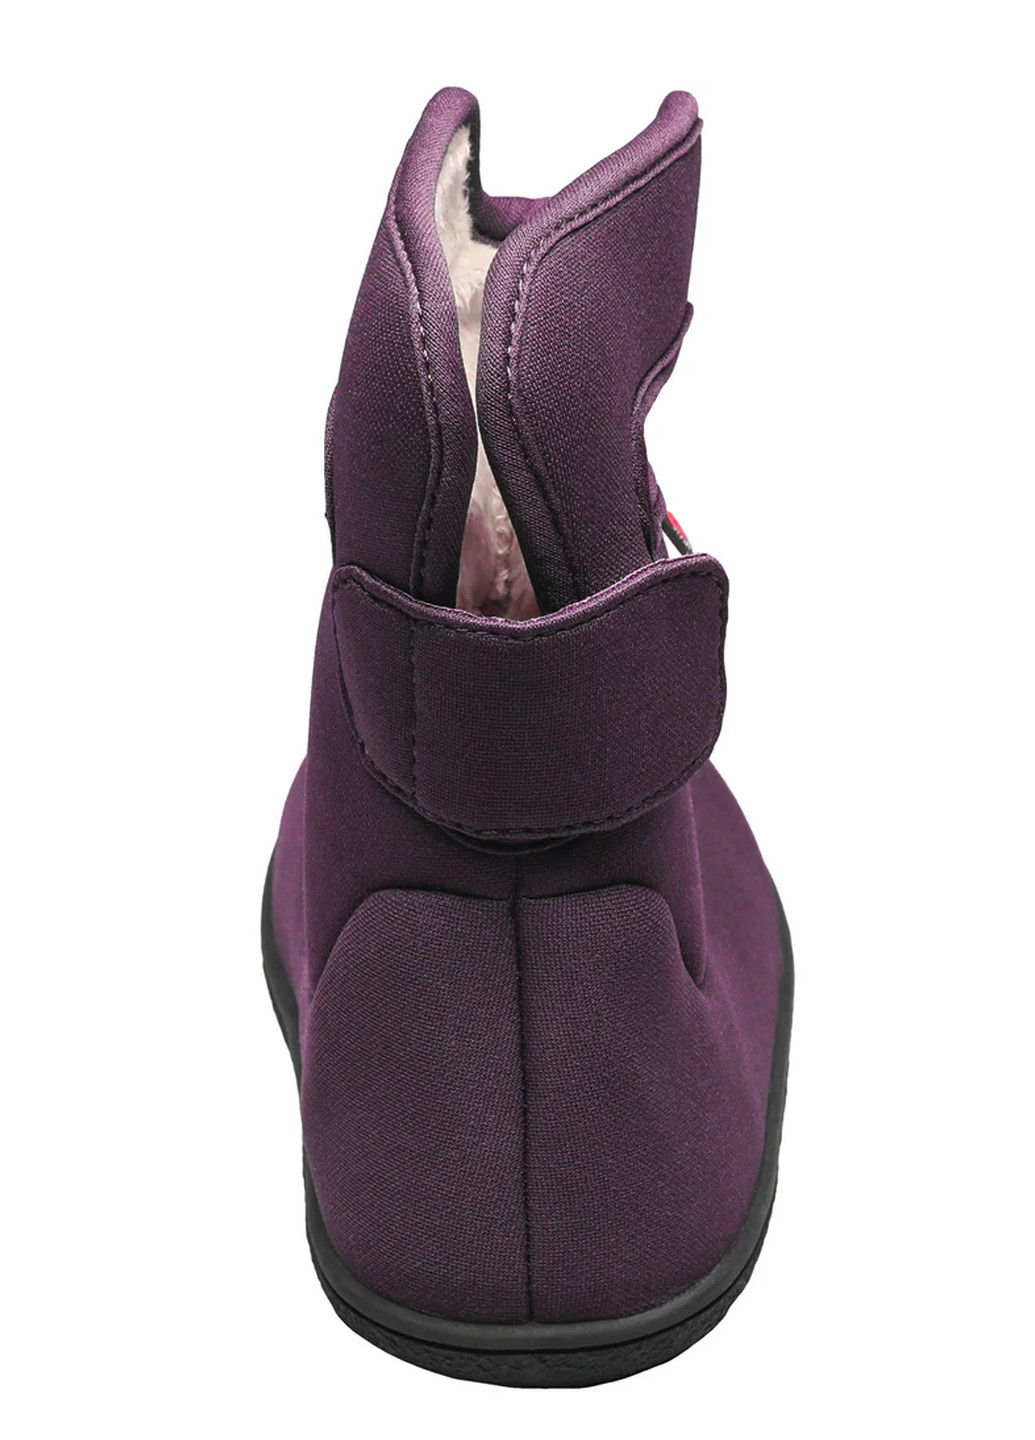 Сапожки детские Bogs youngster solid plum (277943083)